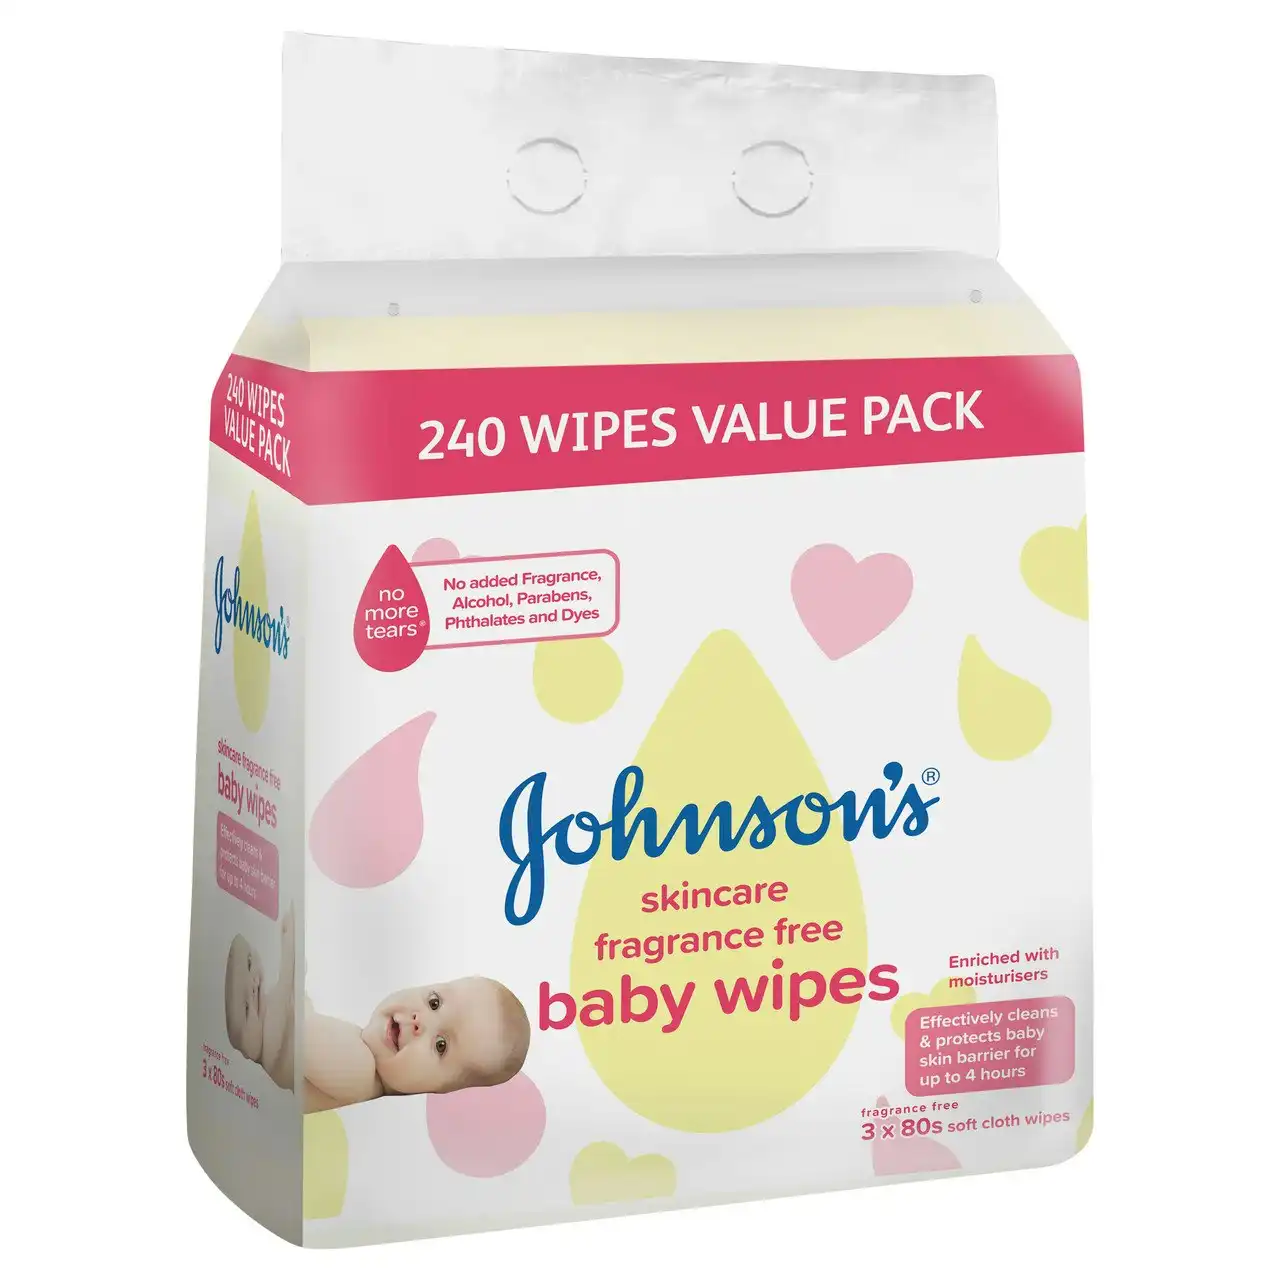 Johnson's Skincare Fragrance Free Baby Wipes 3 x 80 Pack